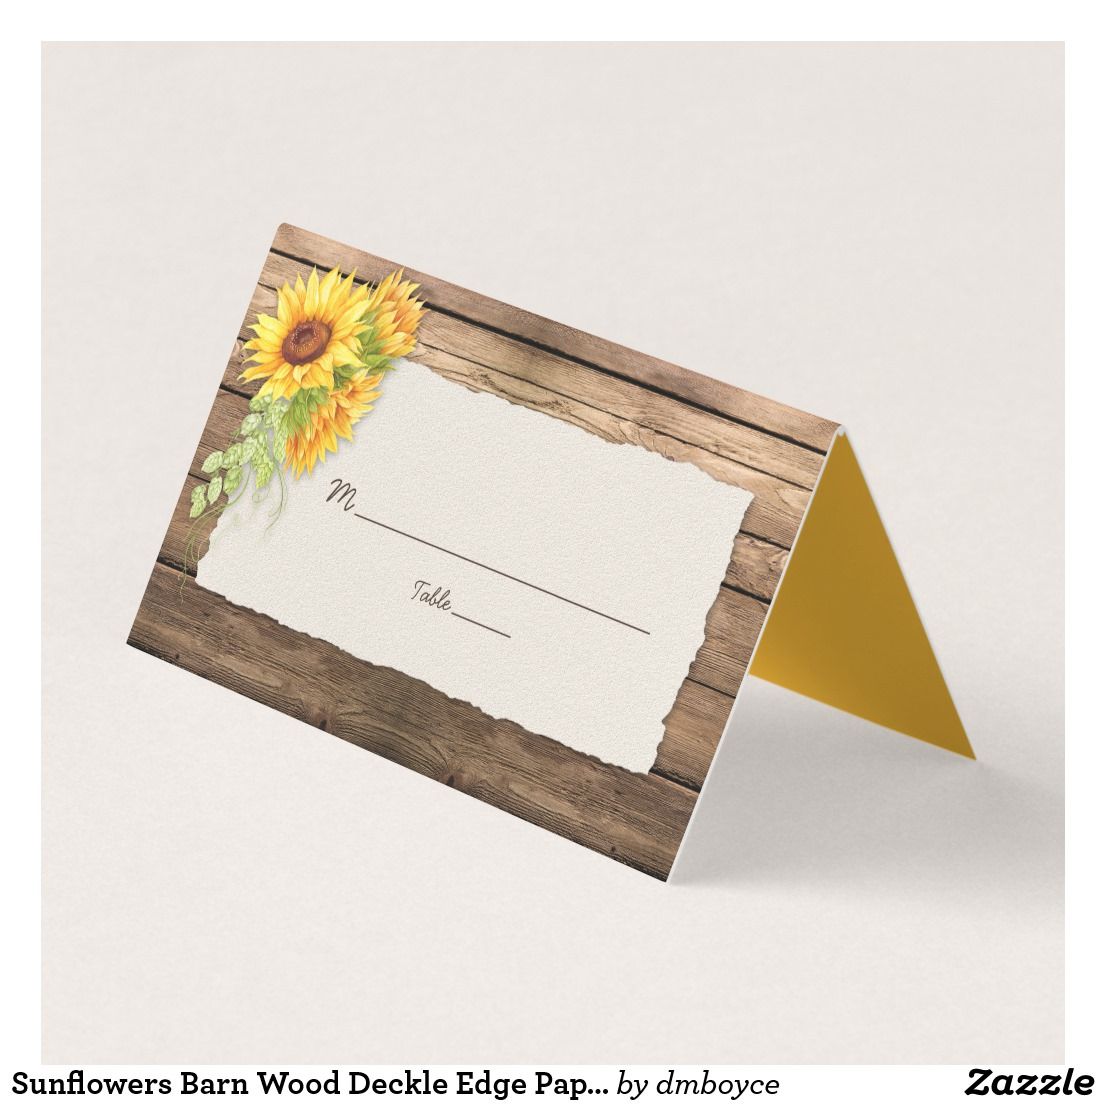 Sunflowers Barn Wood Deckle Edge Paper Place Card